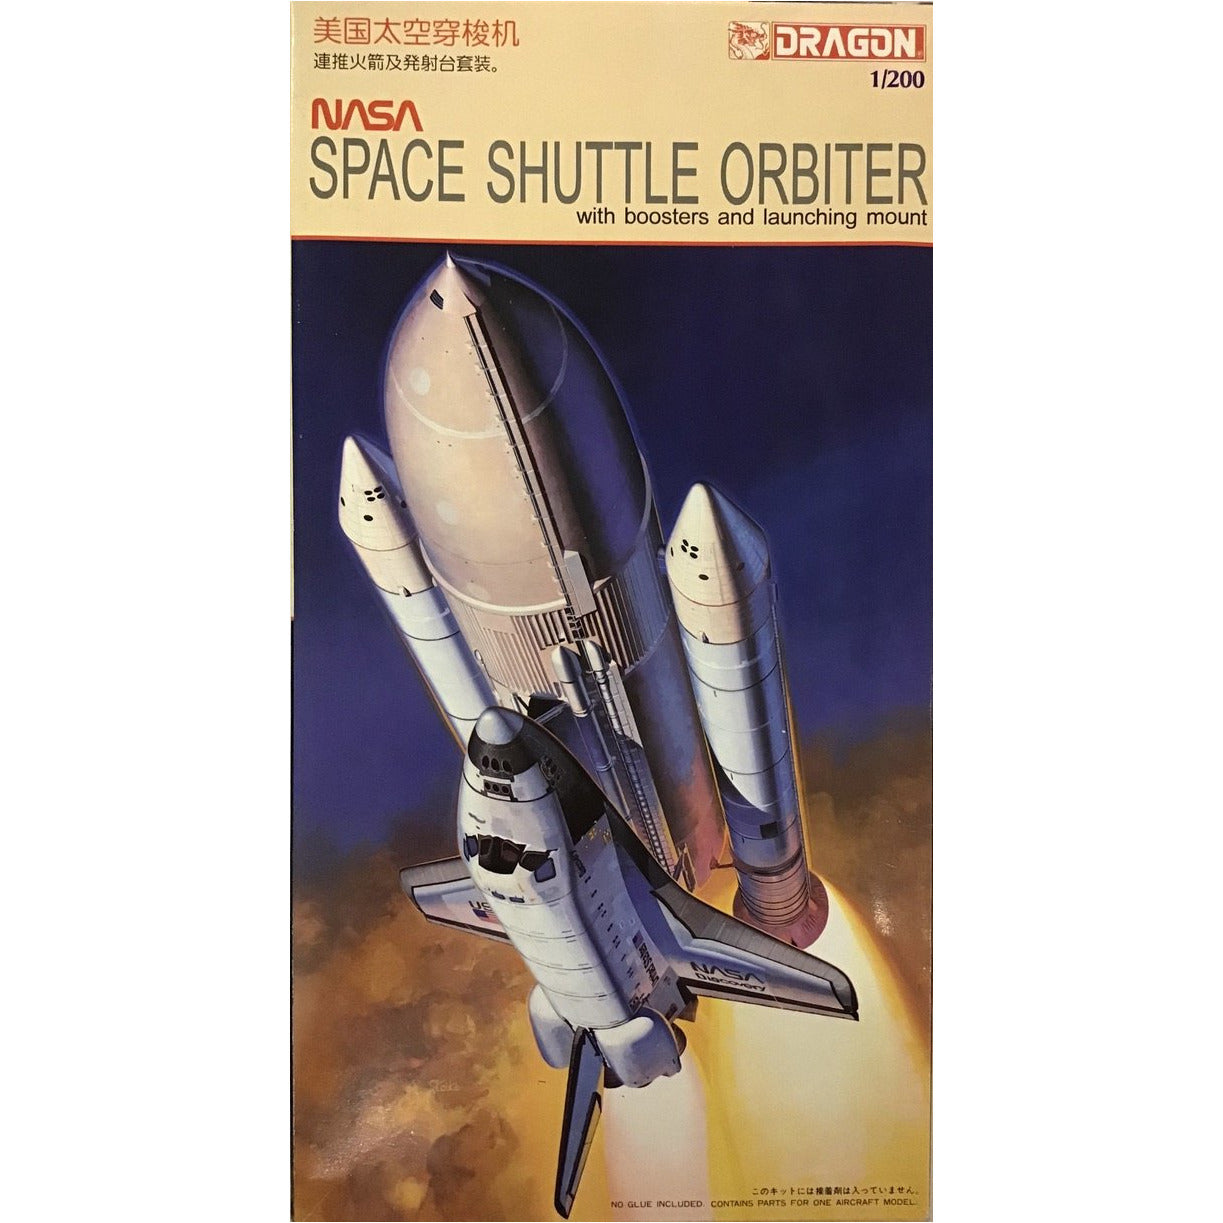 NASA Space Shuttle Orbiter and boosters 1/200 by Dragon Models